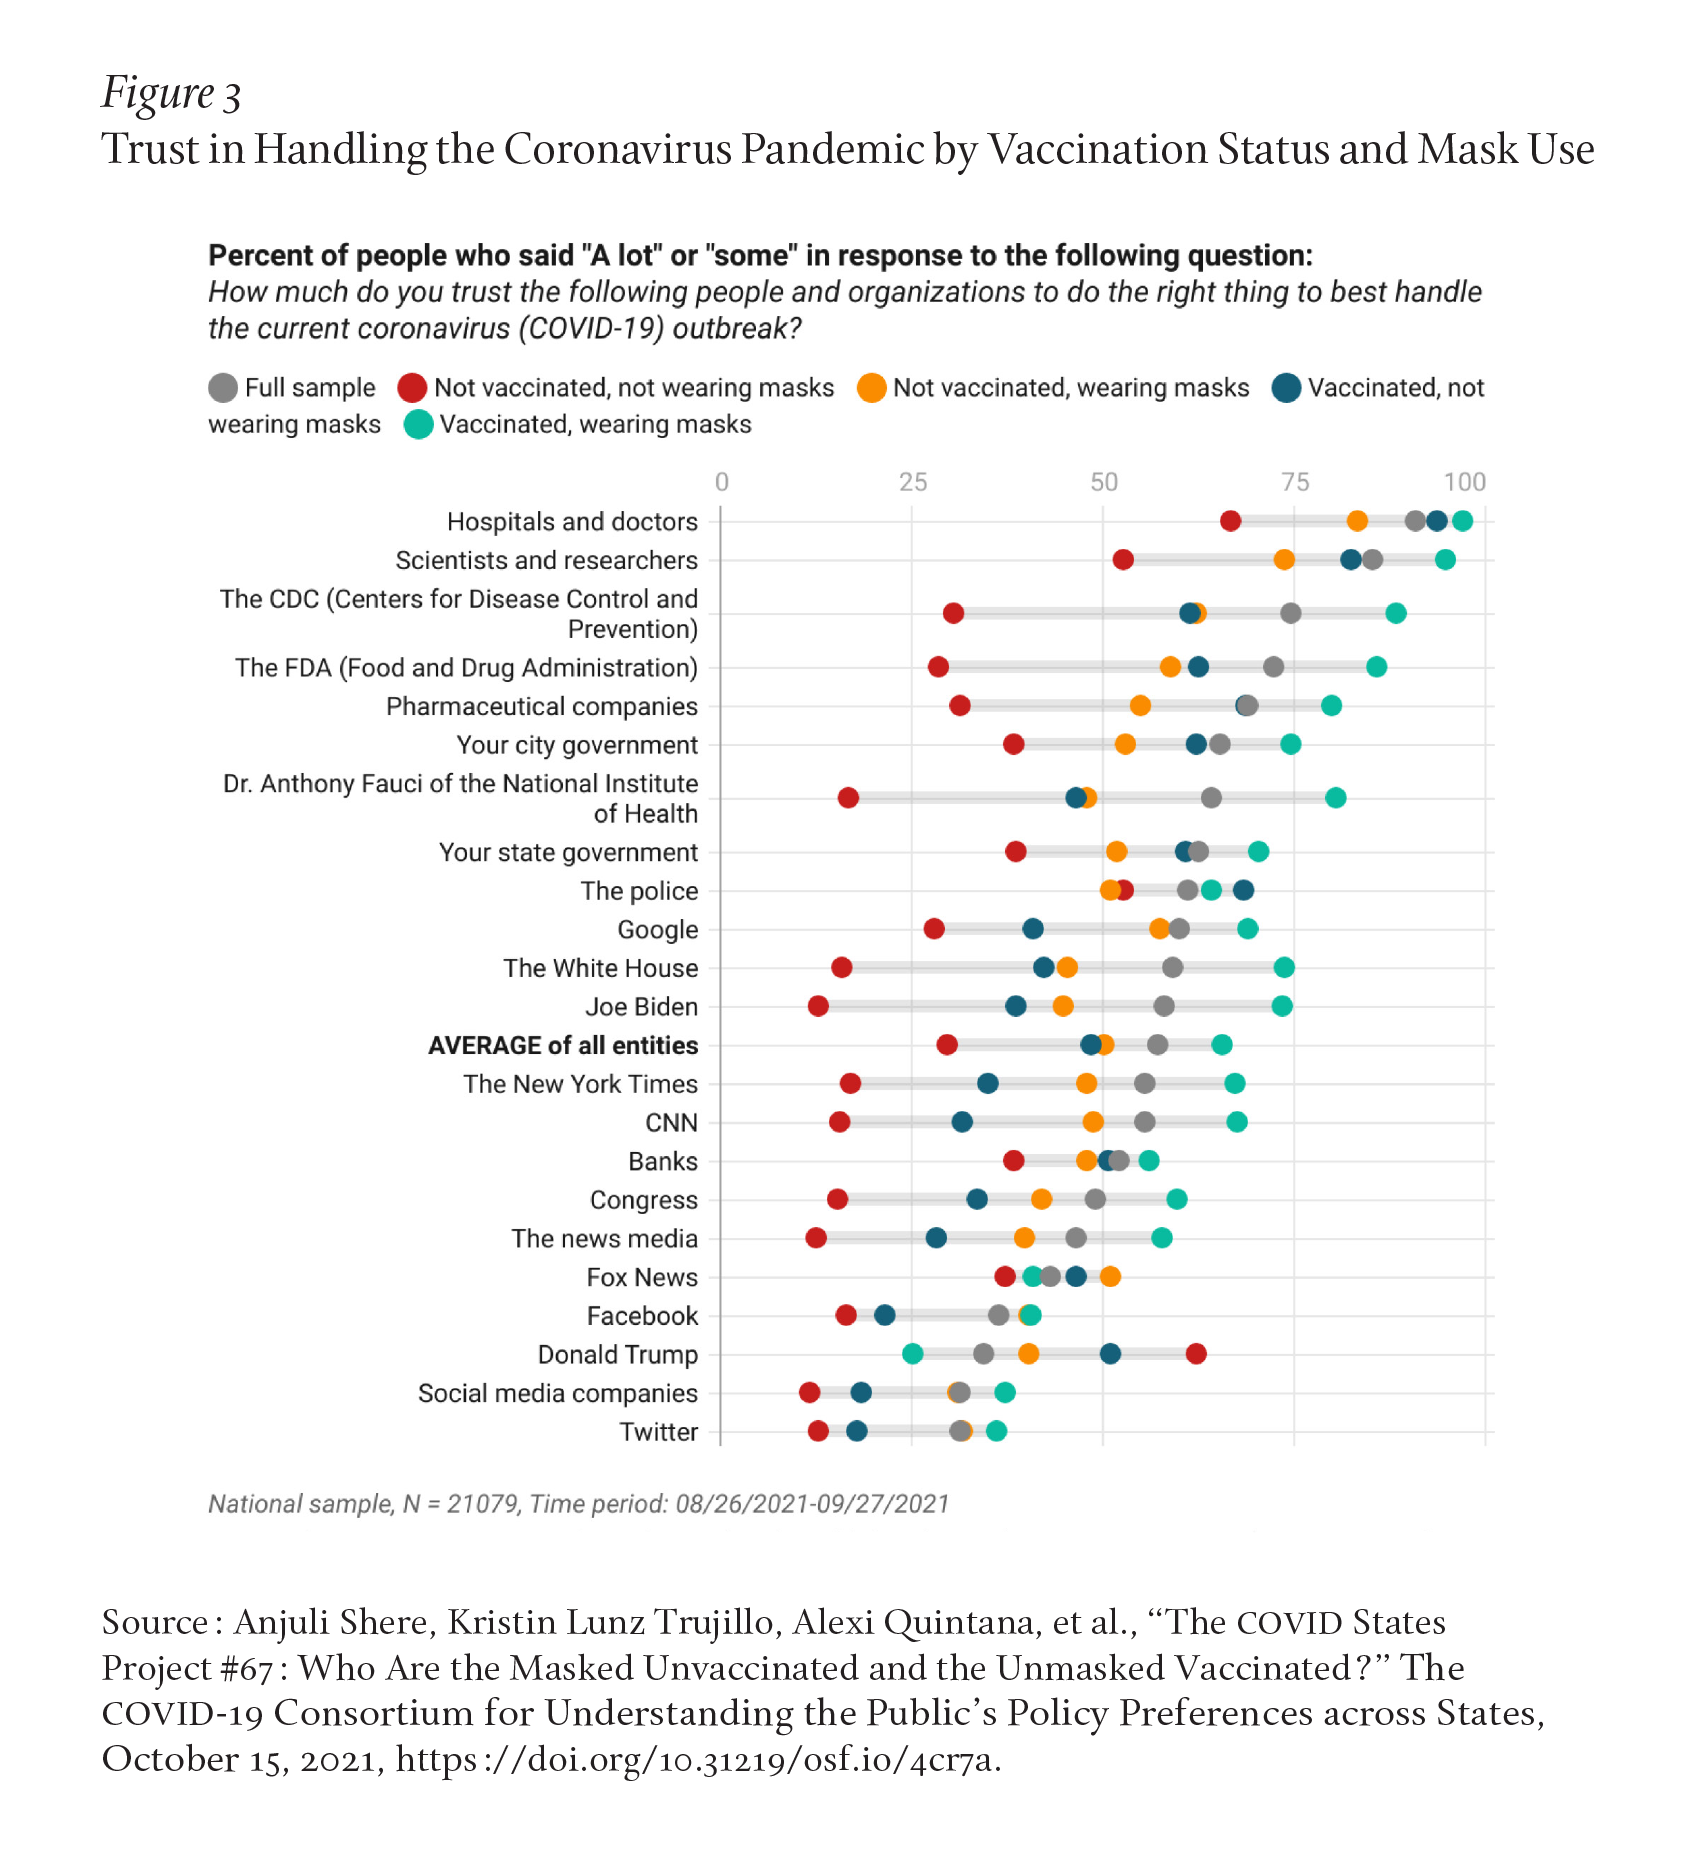 Figure 3 shows the percent of people who said "a lot" or "some" in response to question: How much do you trust the following people and orgs to do the right thing to handle the COVID-19 outbreak? Ranking at the top generally are hospitals, doctors, and the CDC. Though for each group, respondents are divided by vaccine status and use of masks. This reveals great variation within the sample. At the bottom generally are social media and Donald Trump. Data from he COVID States Project #67.